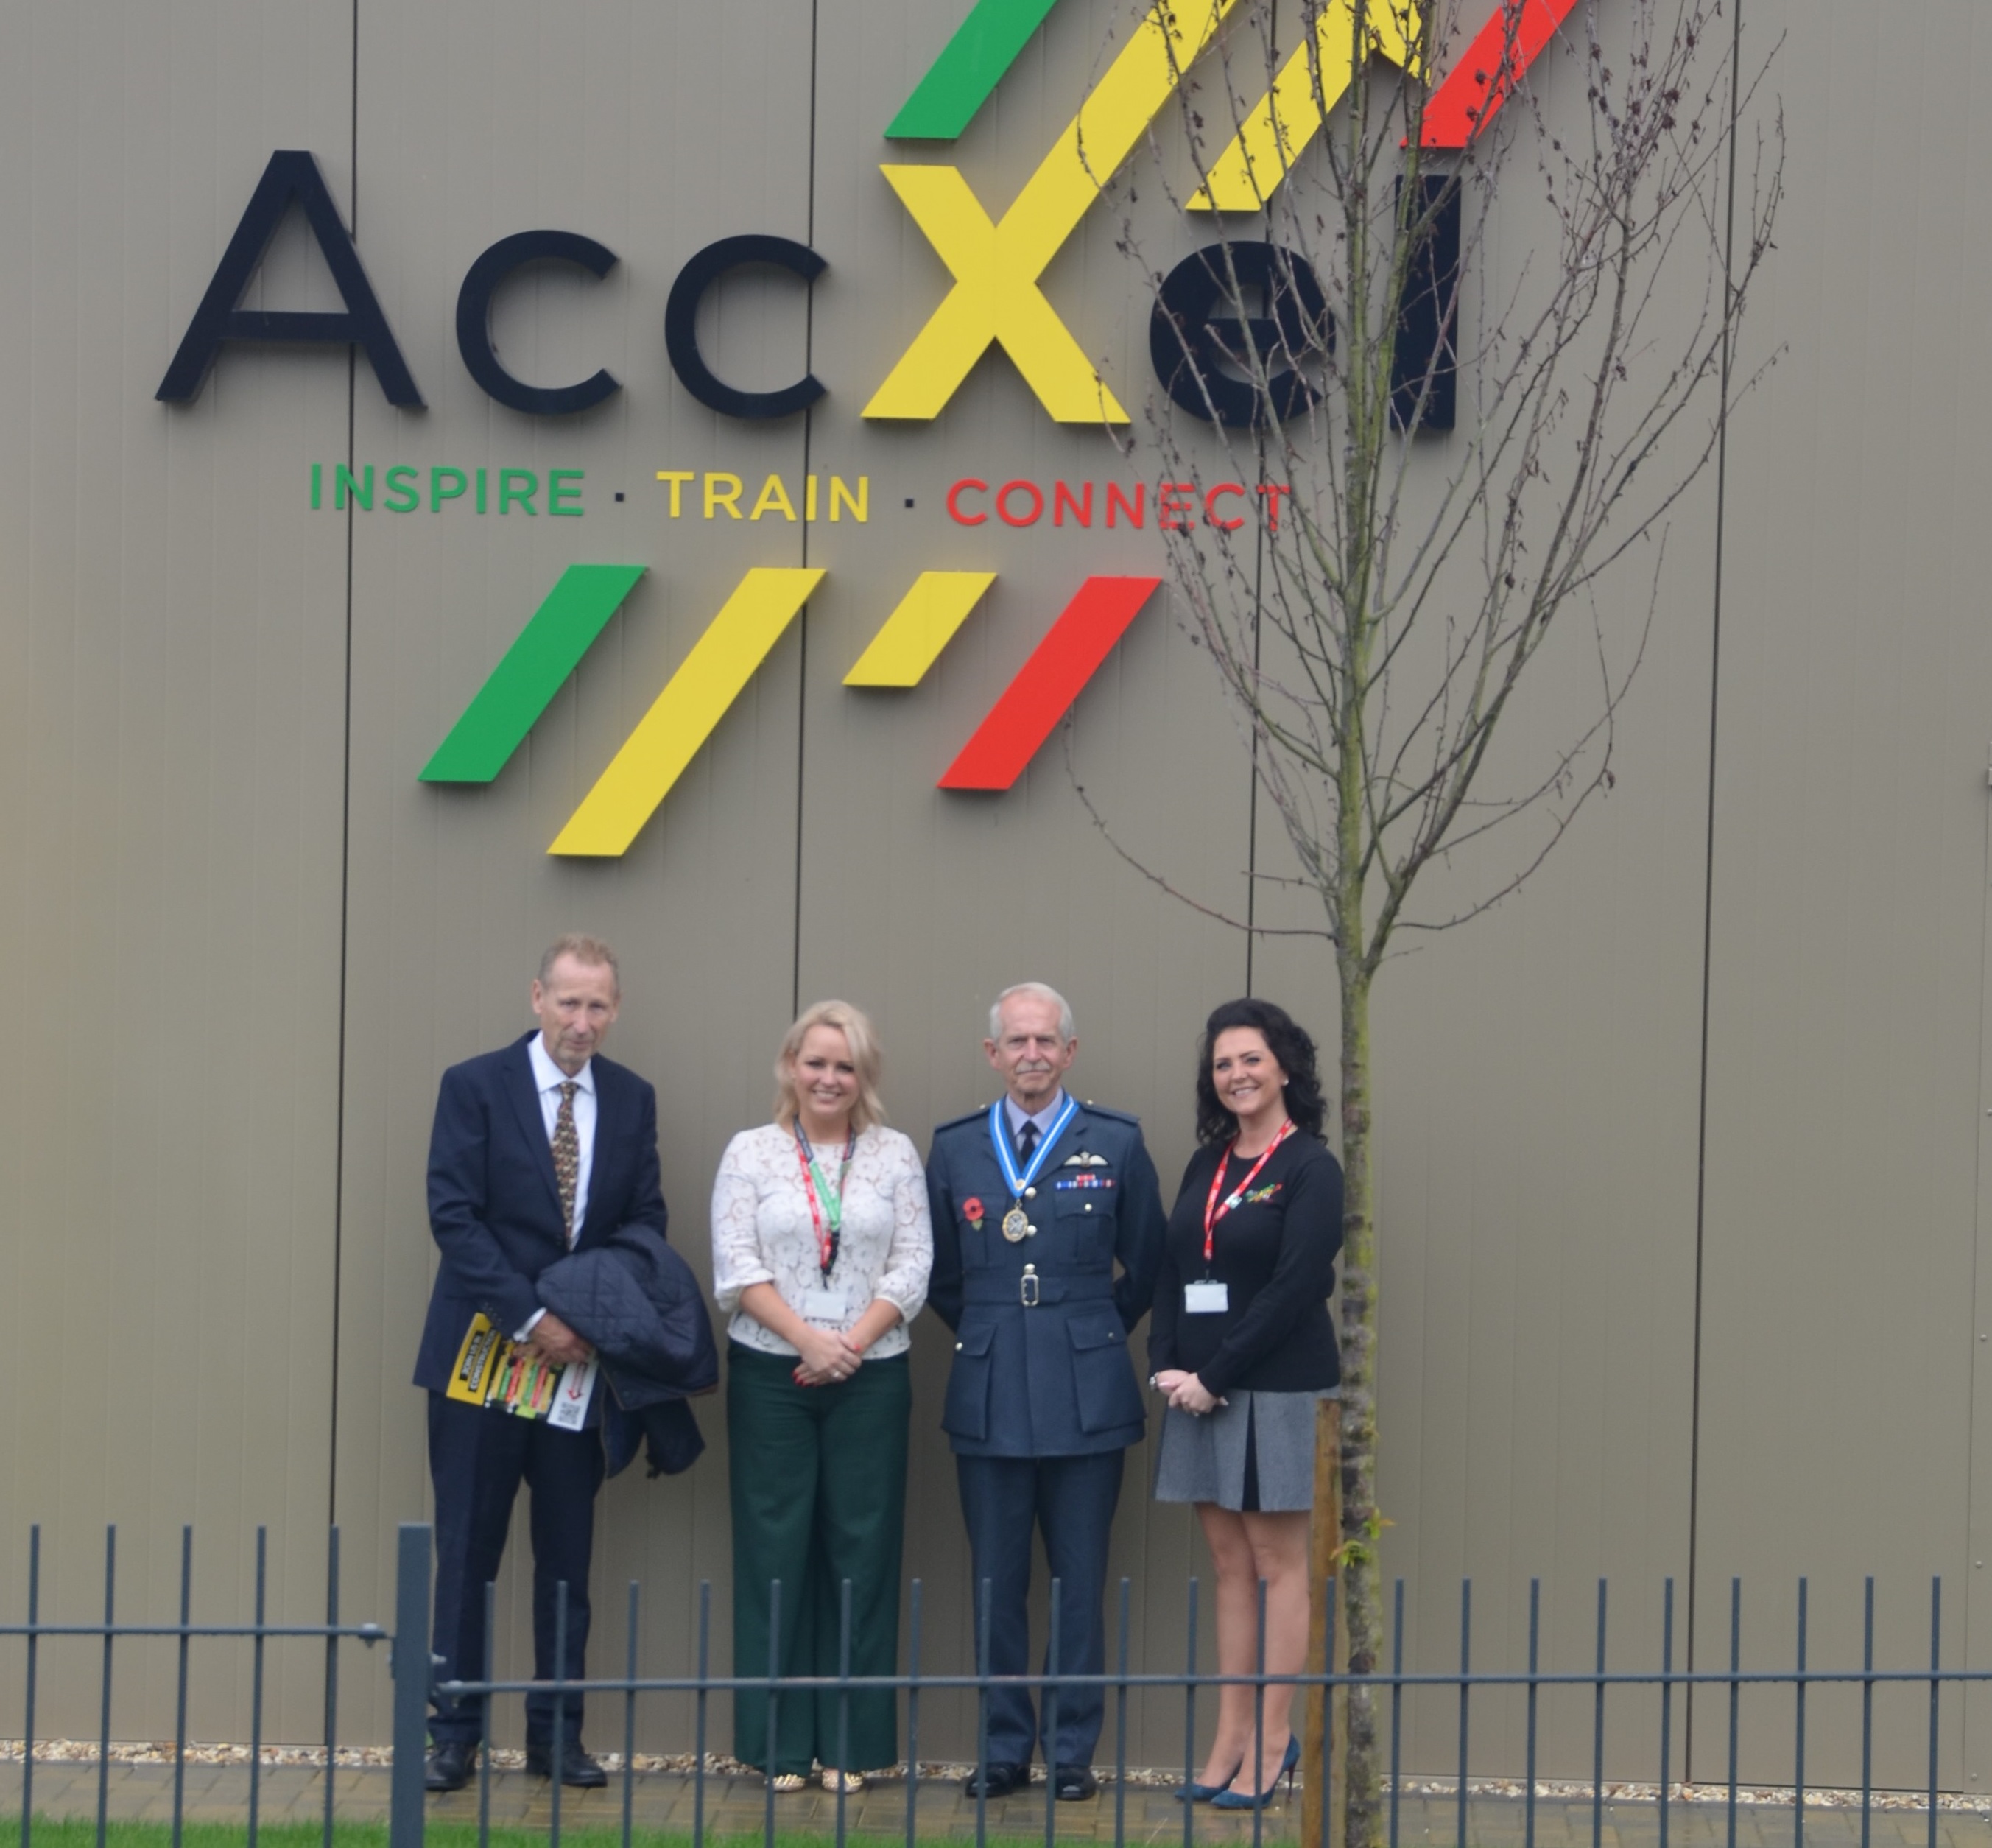 1 November 2022 - Visit to AccXel, Cinderford, with Founder and Managing Director Nicola Bird, alongside Natalie King and Roger Deeks.